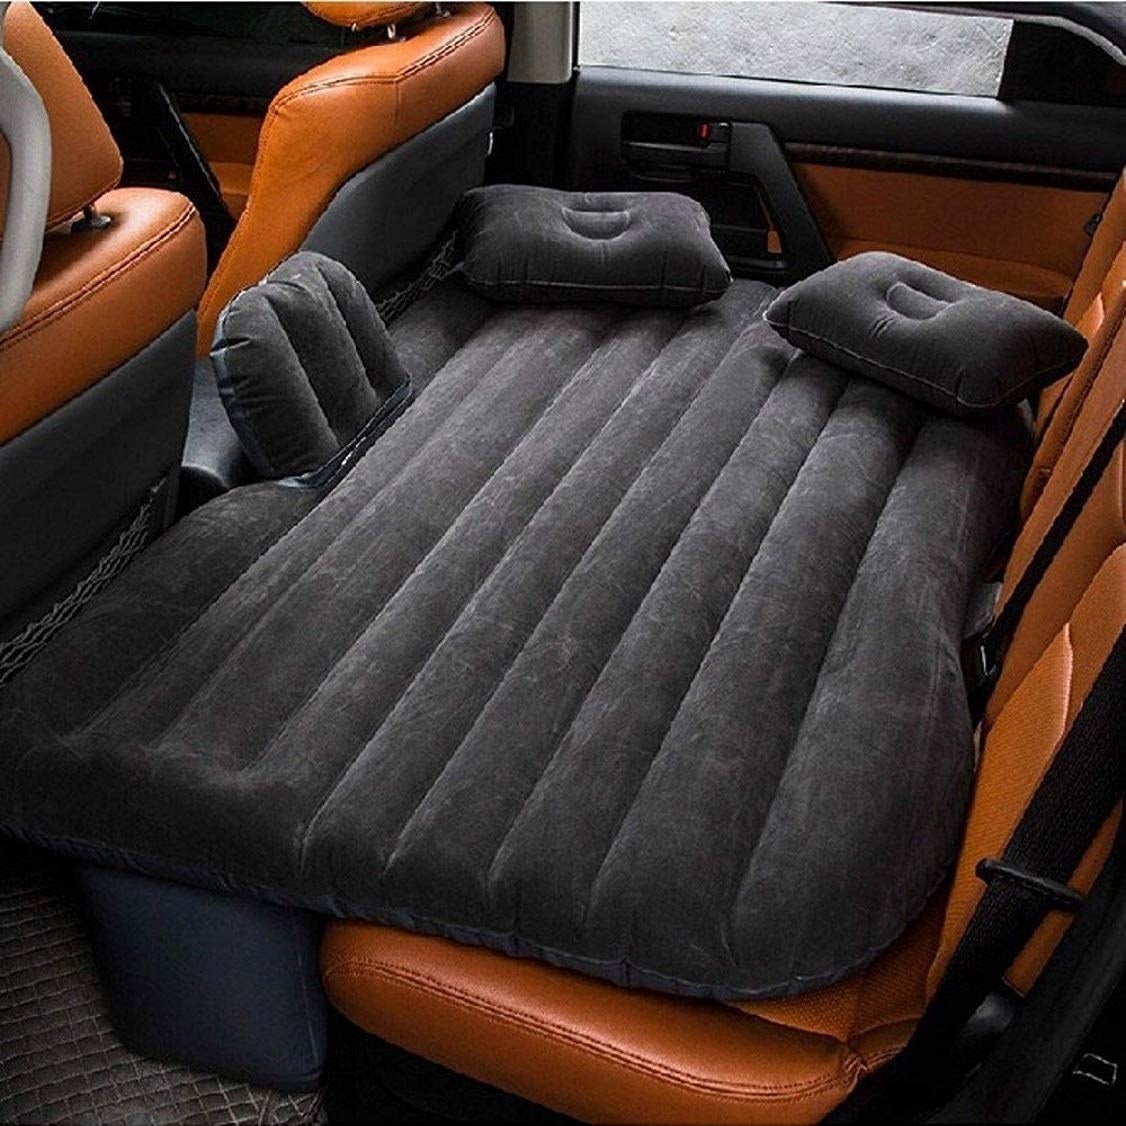 Air mattress spread over the backseat of a car.